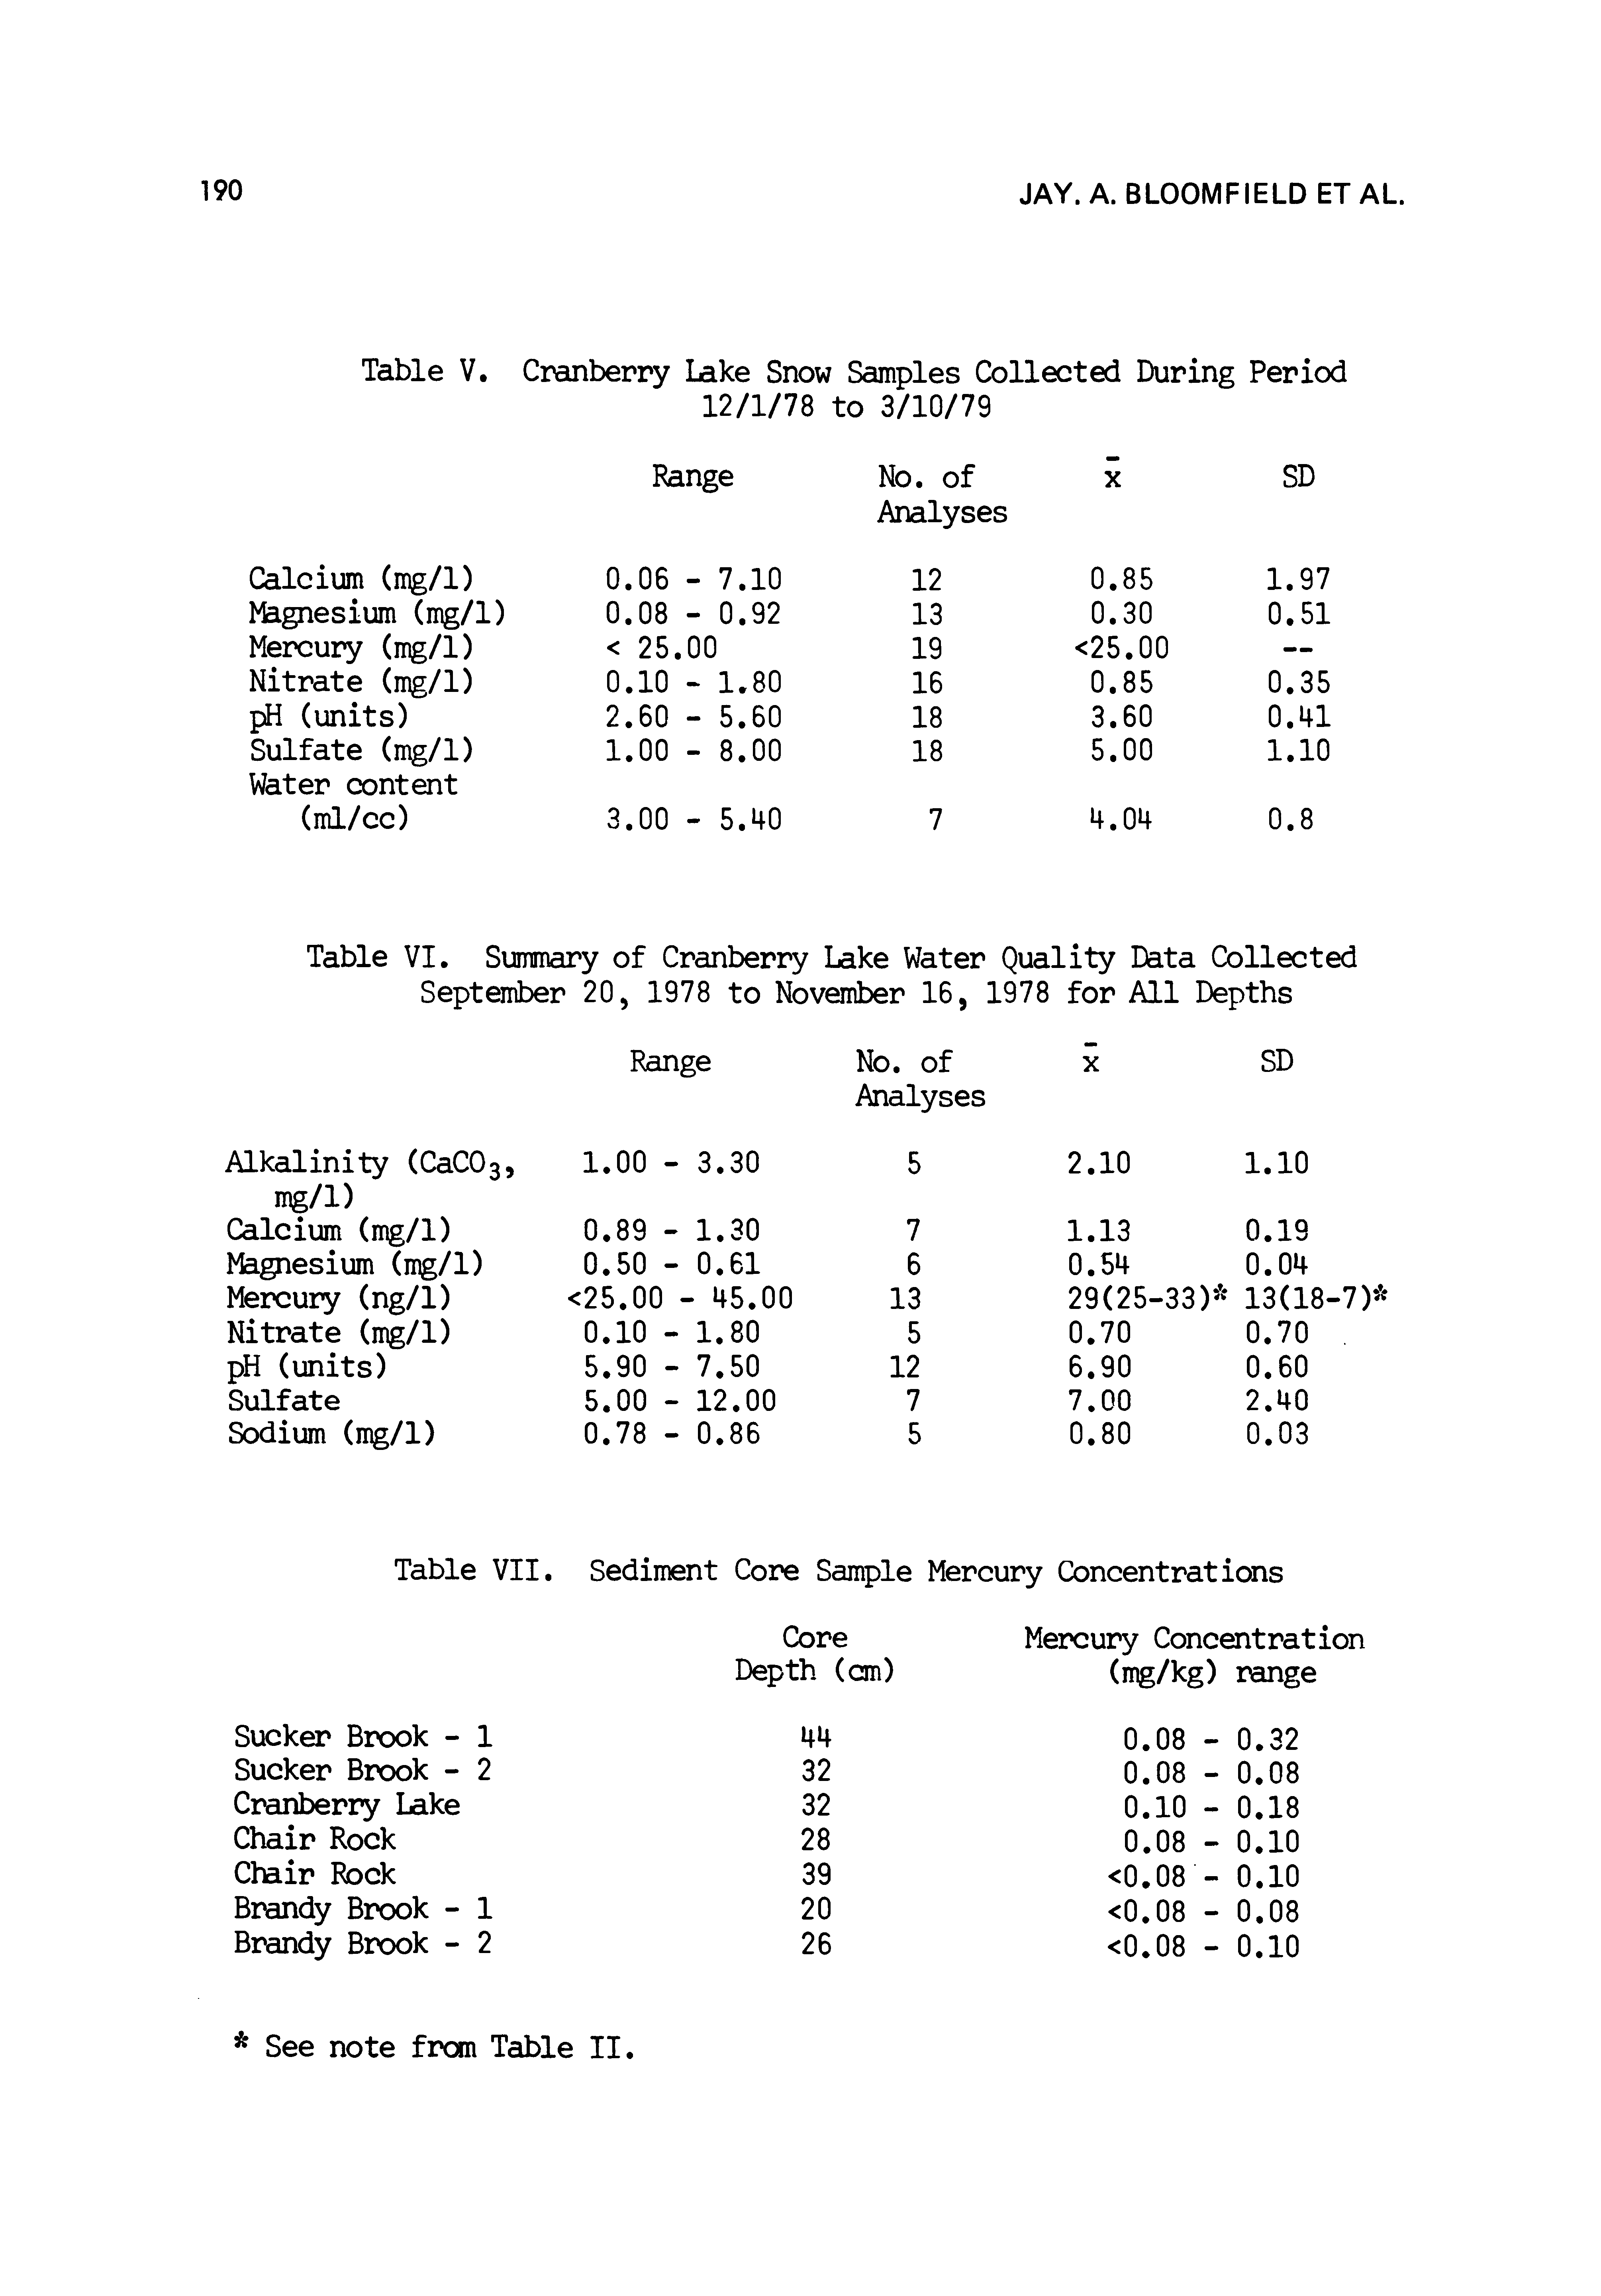 Table V. Cranberry Lake Snow Samples Collected During Period 12/1/78 to 3/10/79...